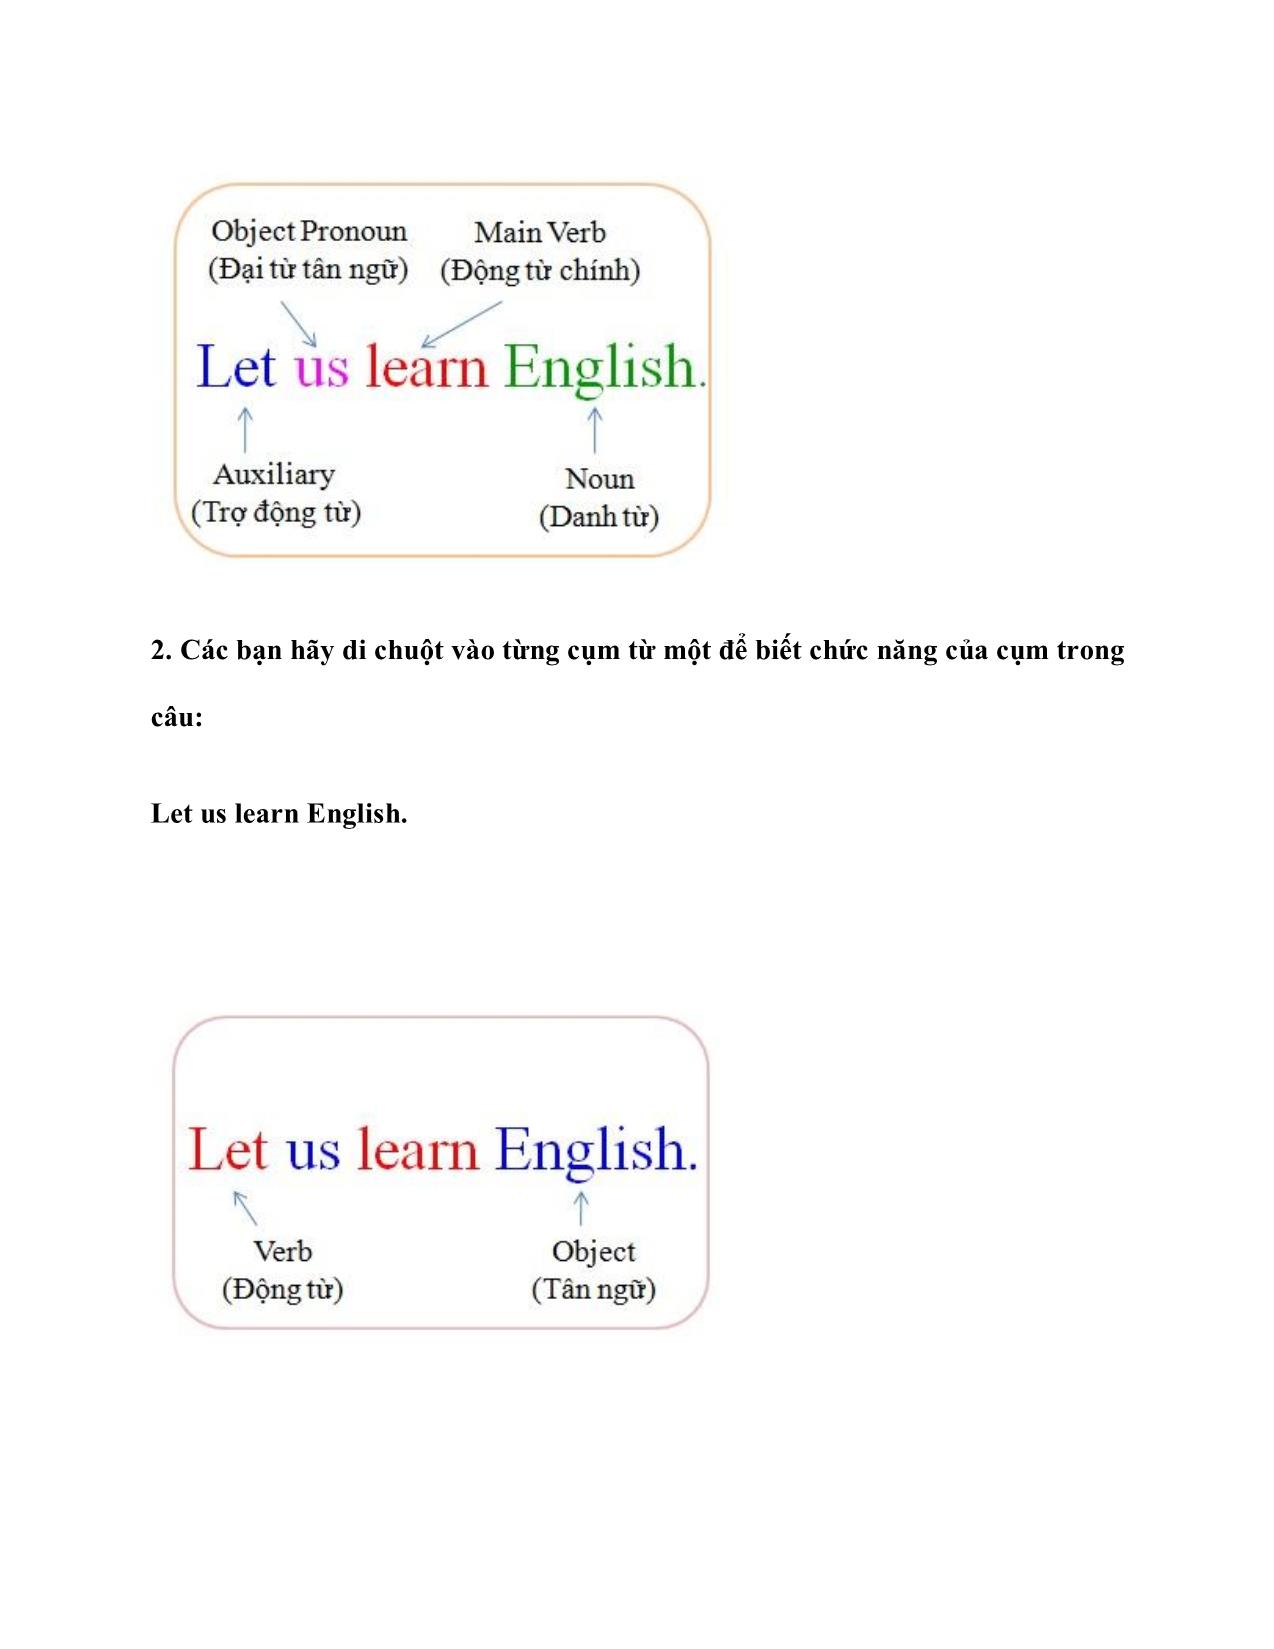 Let’s learn English trang 3